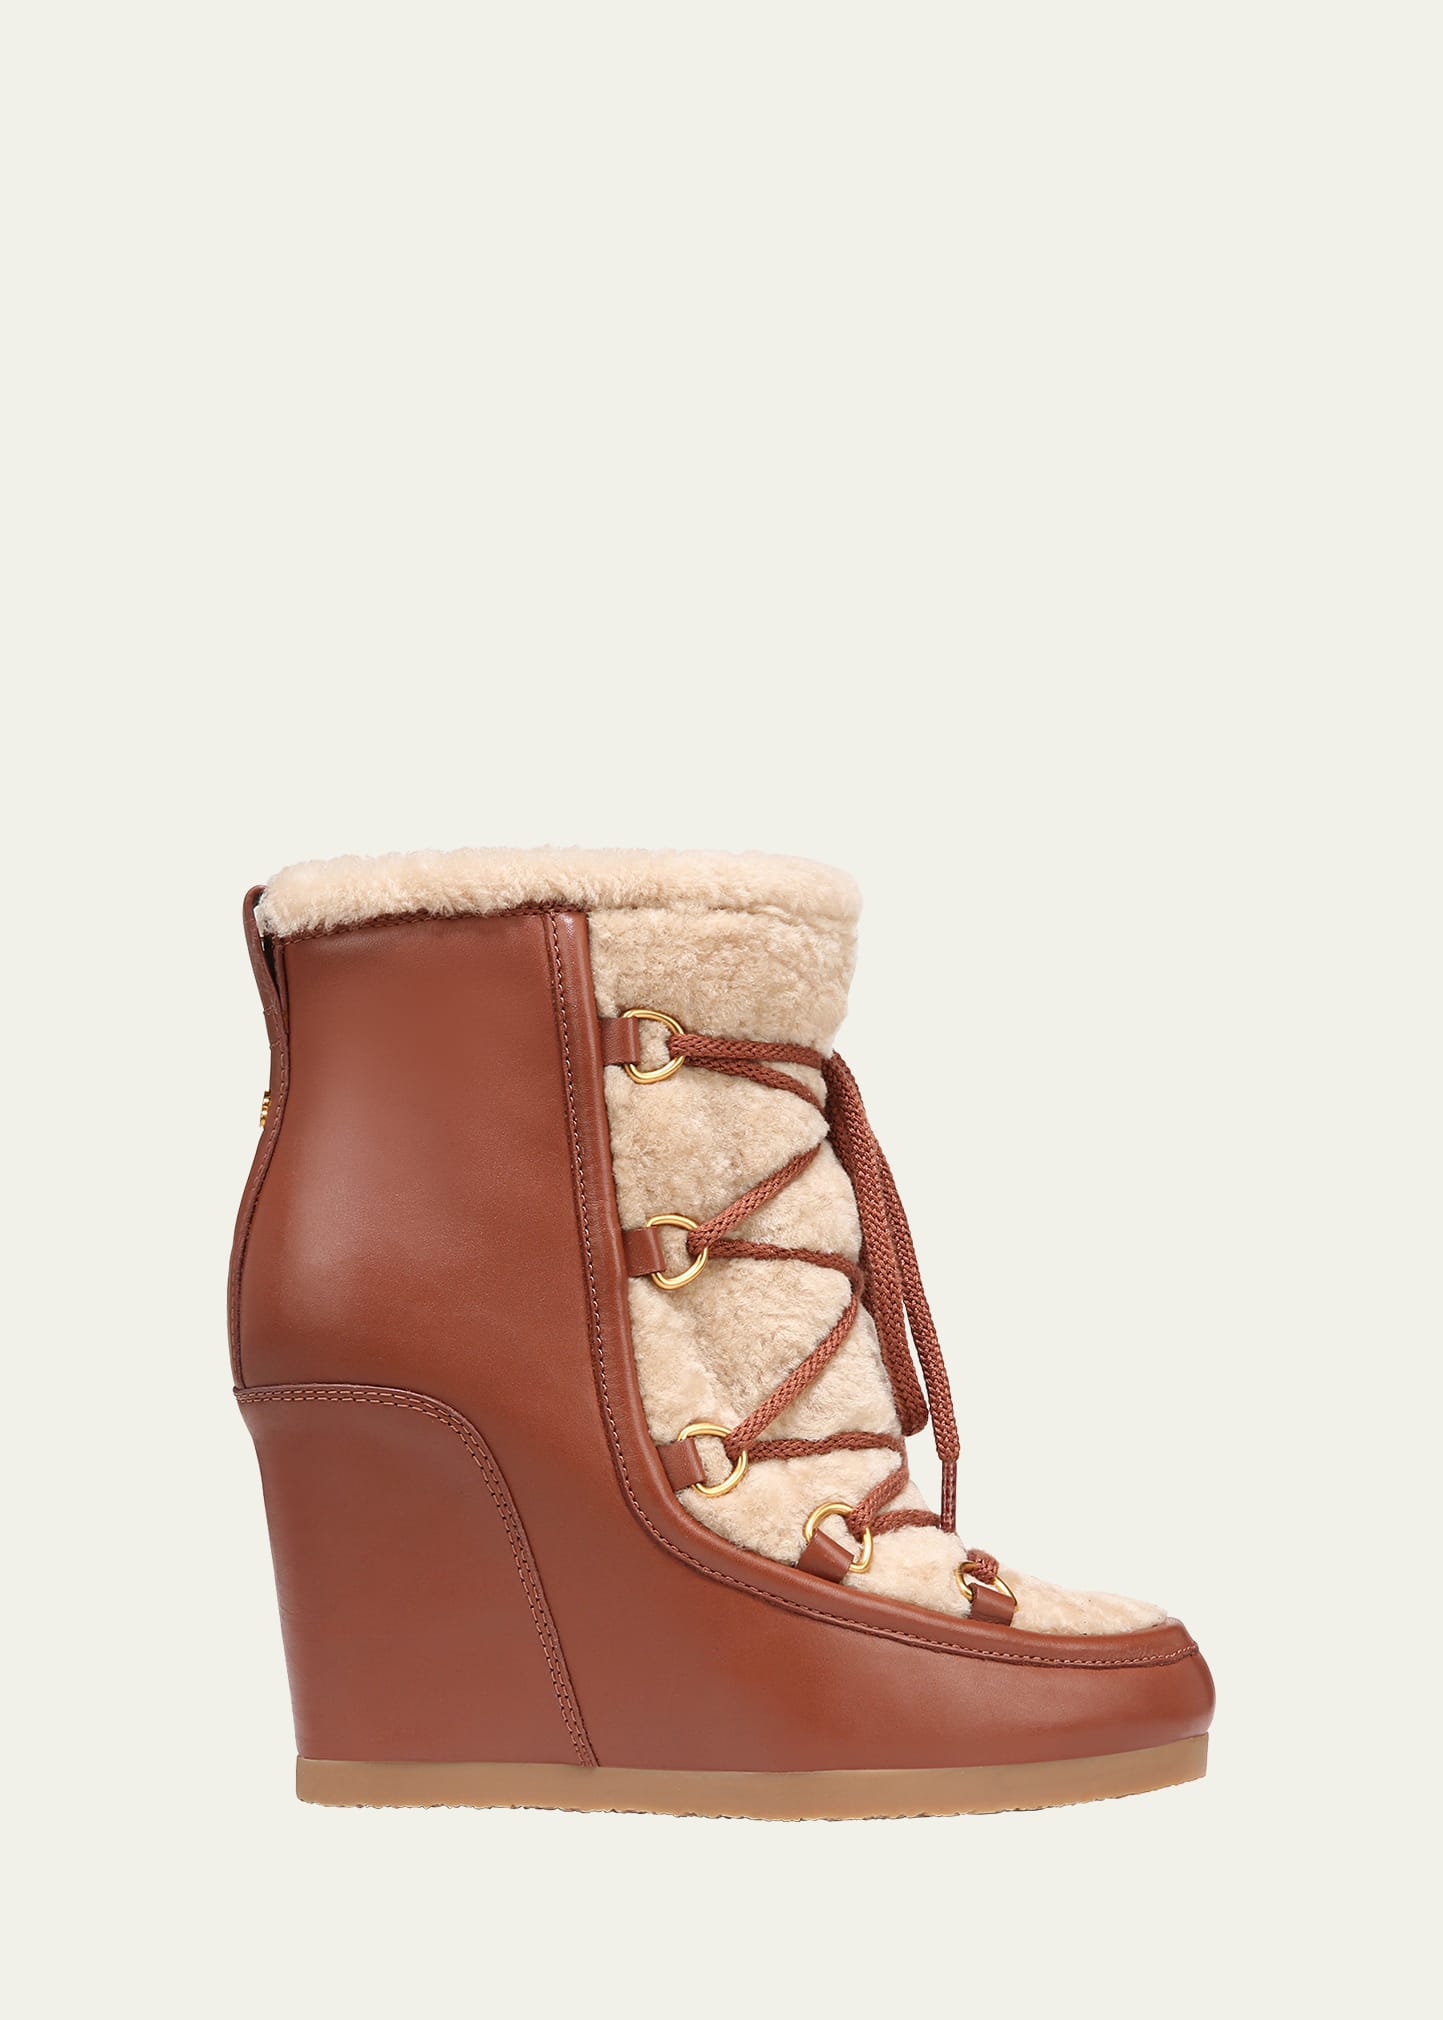 Elfred Leather Shearling Lace-Up Booties